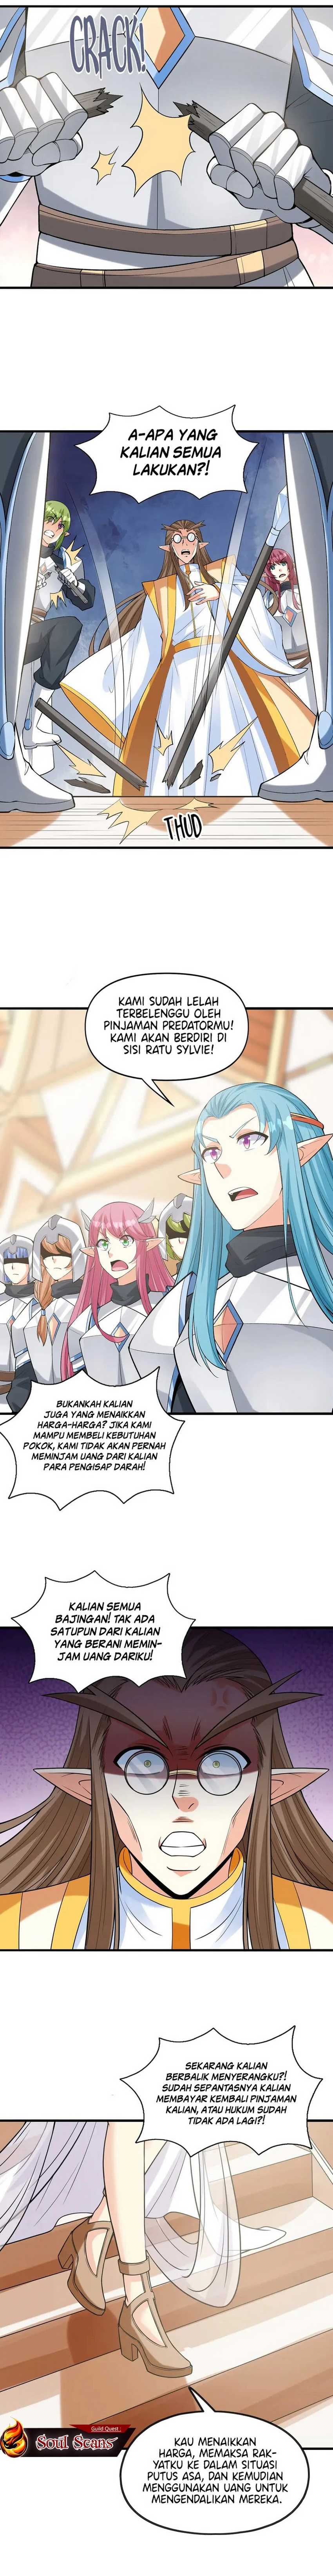 My Harem Is Entirely Female Demon Villains Chapter 67